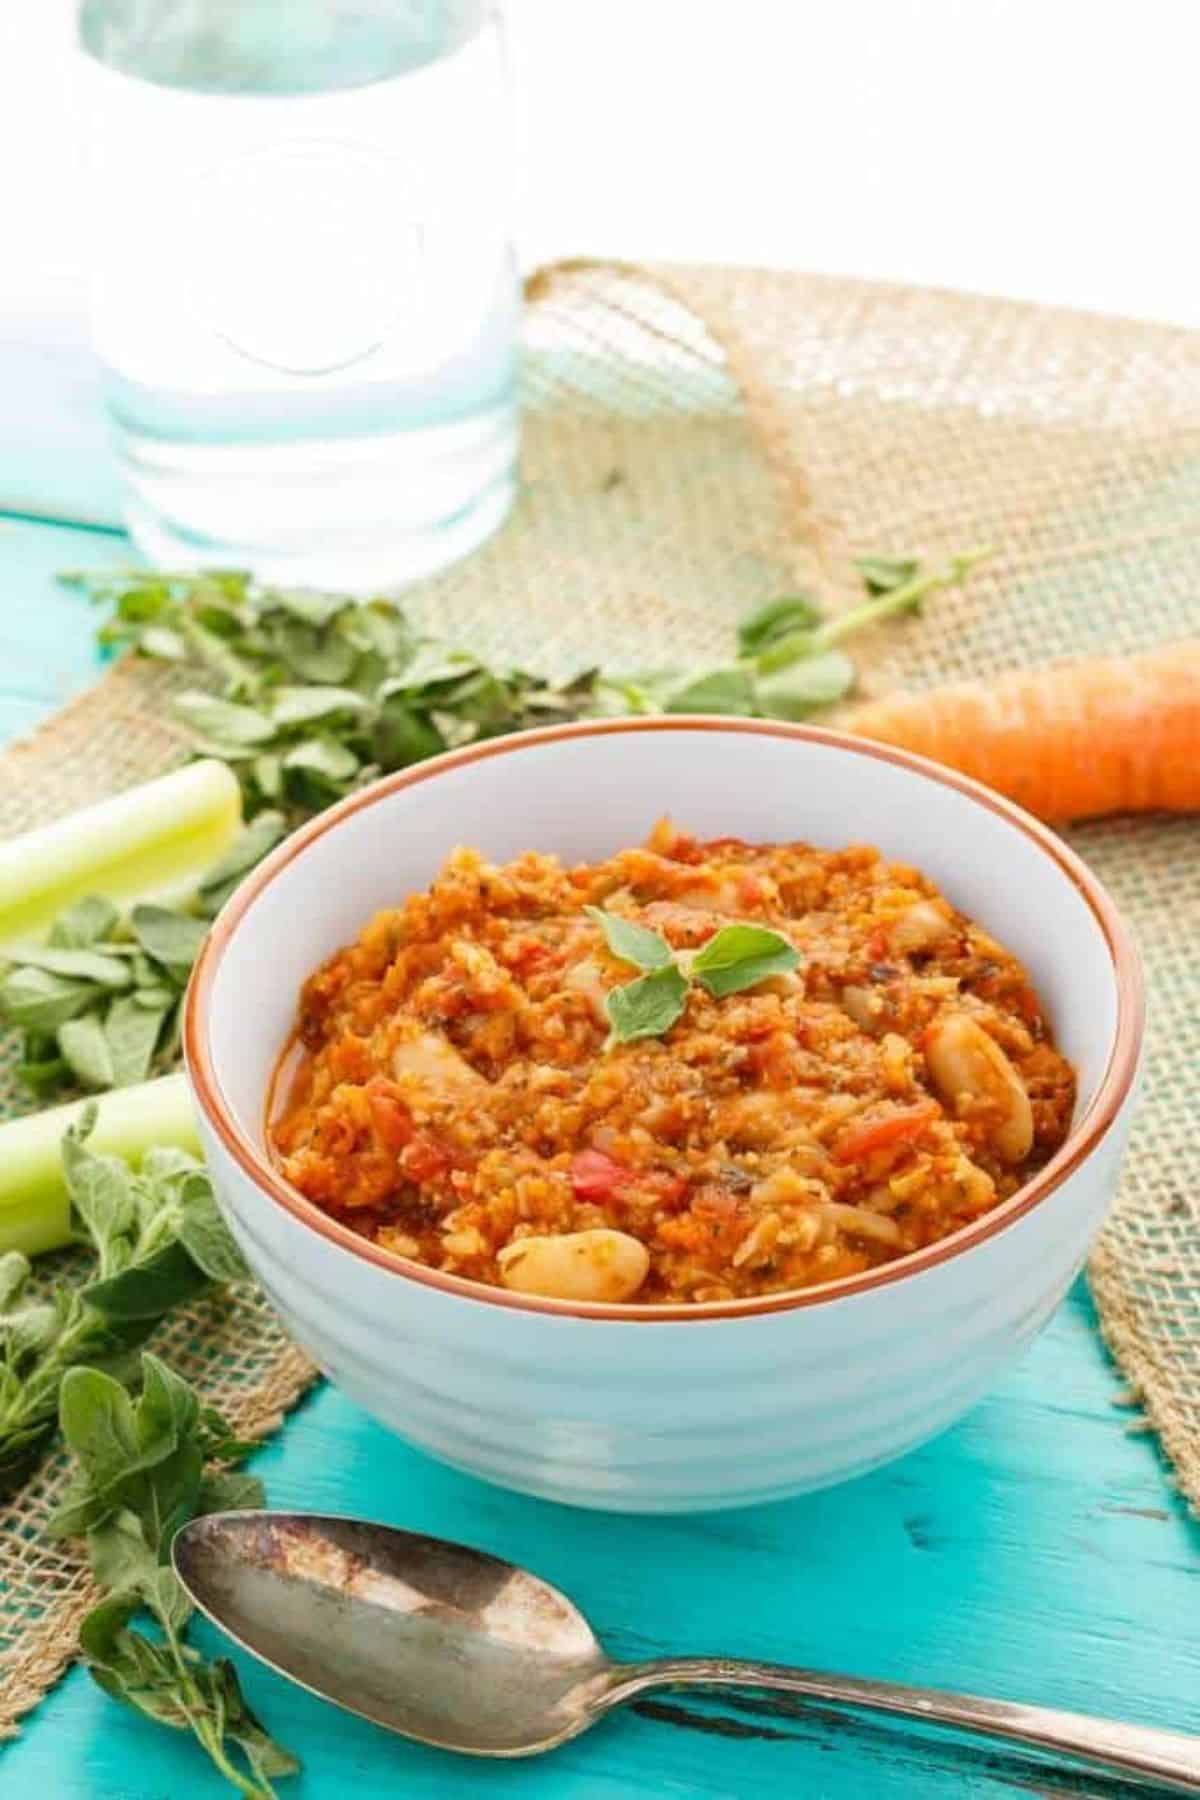 Delicious Vegetarian Chili in a bowl.